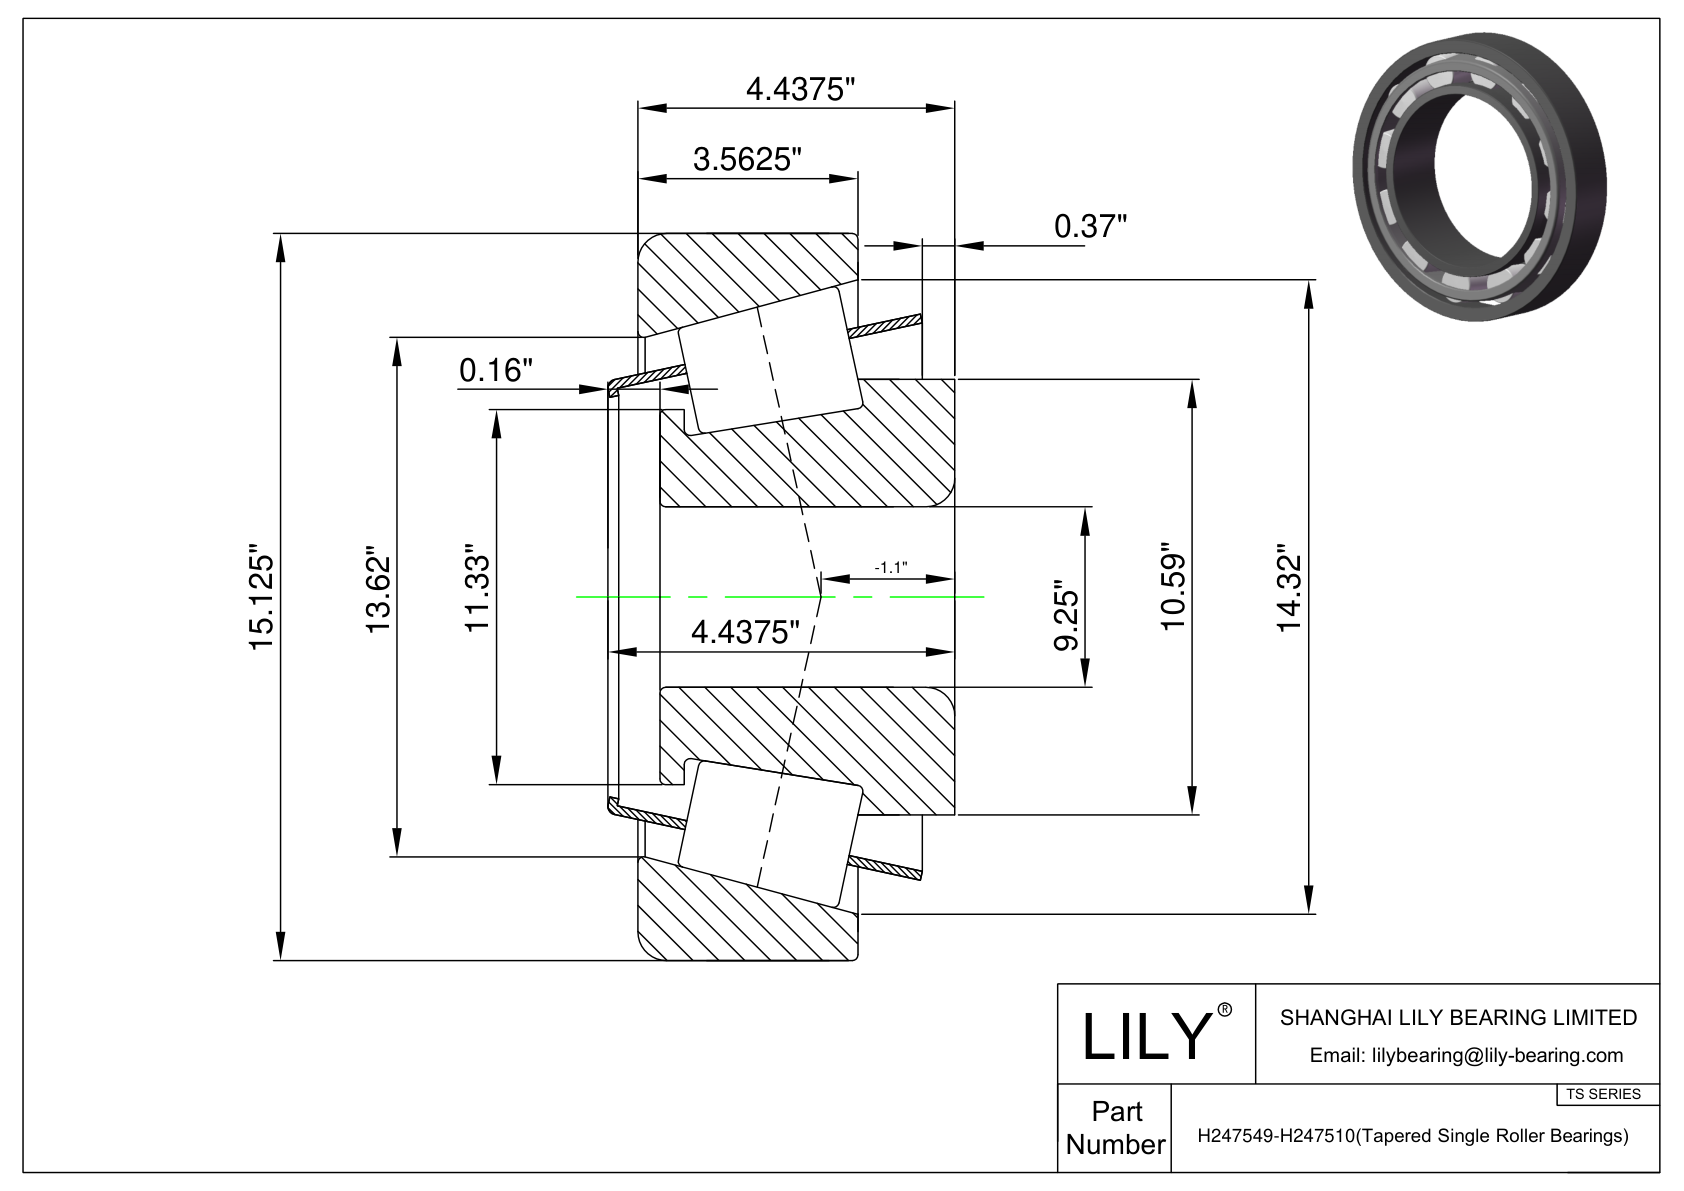 H247549-H247510 TS (Tapered Single Roller Bearings) (Imperial) cad drawing